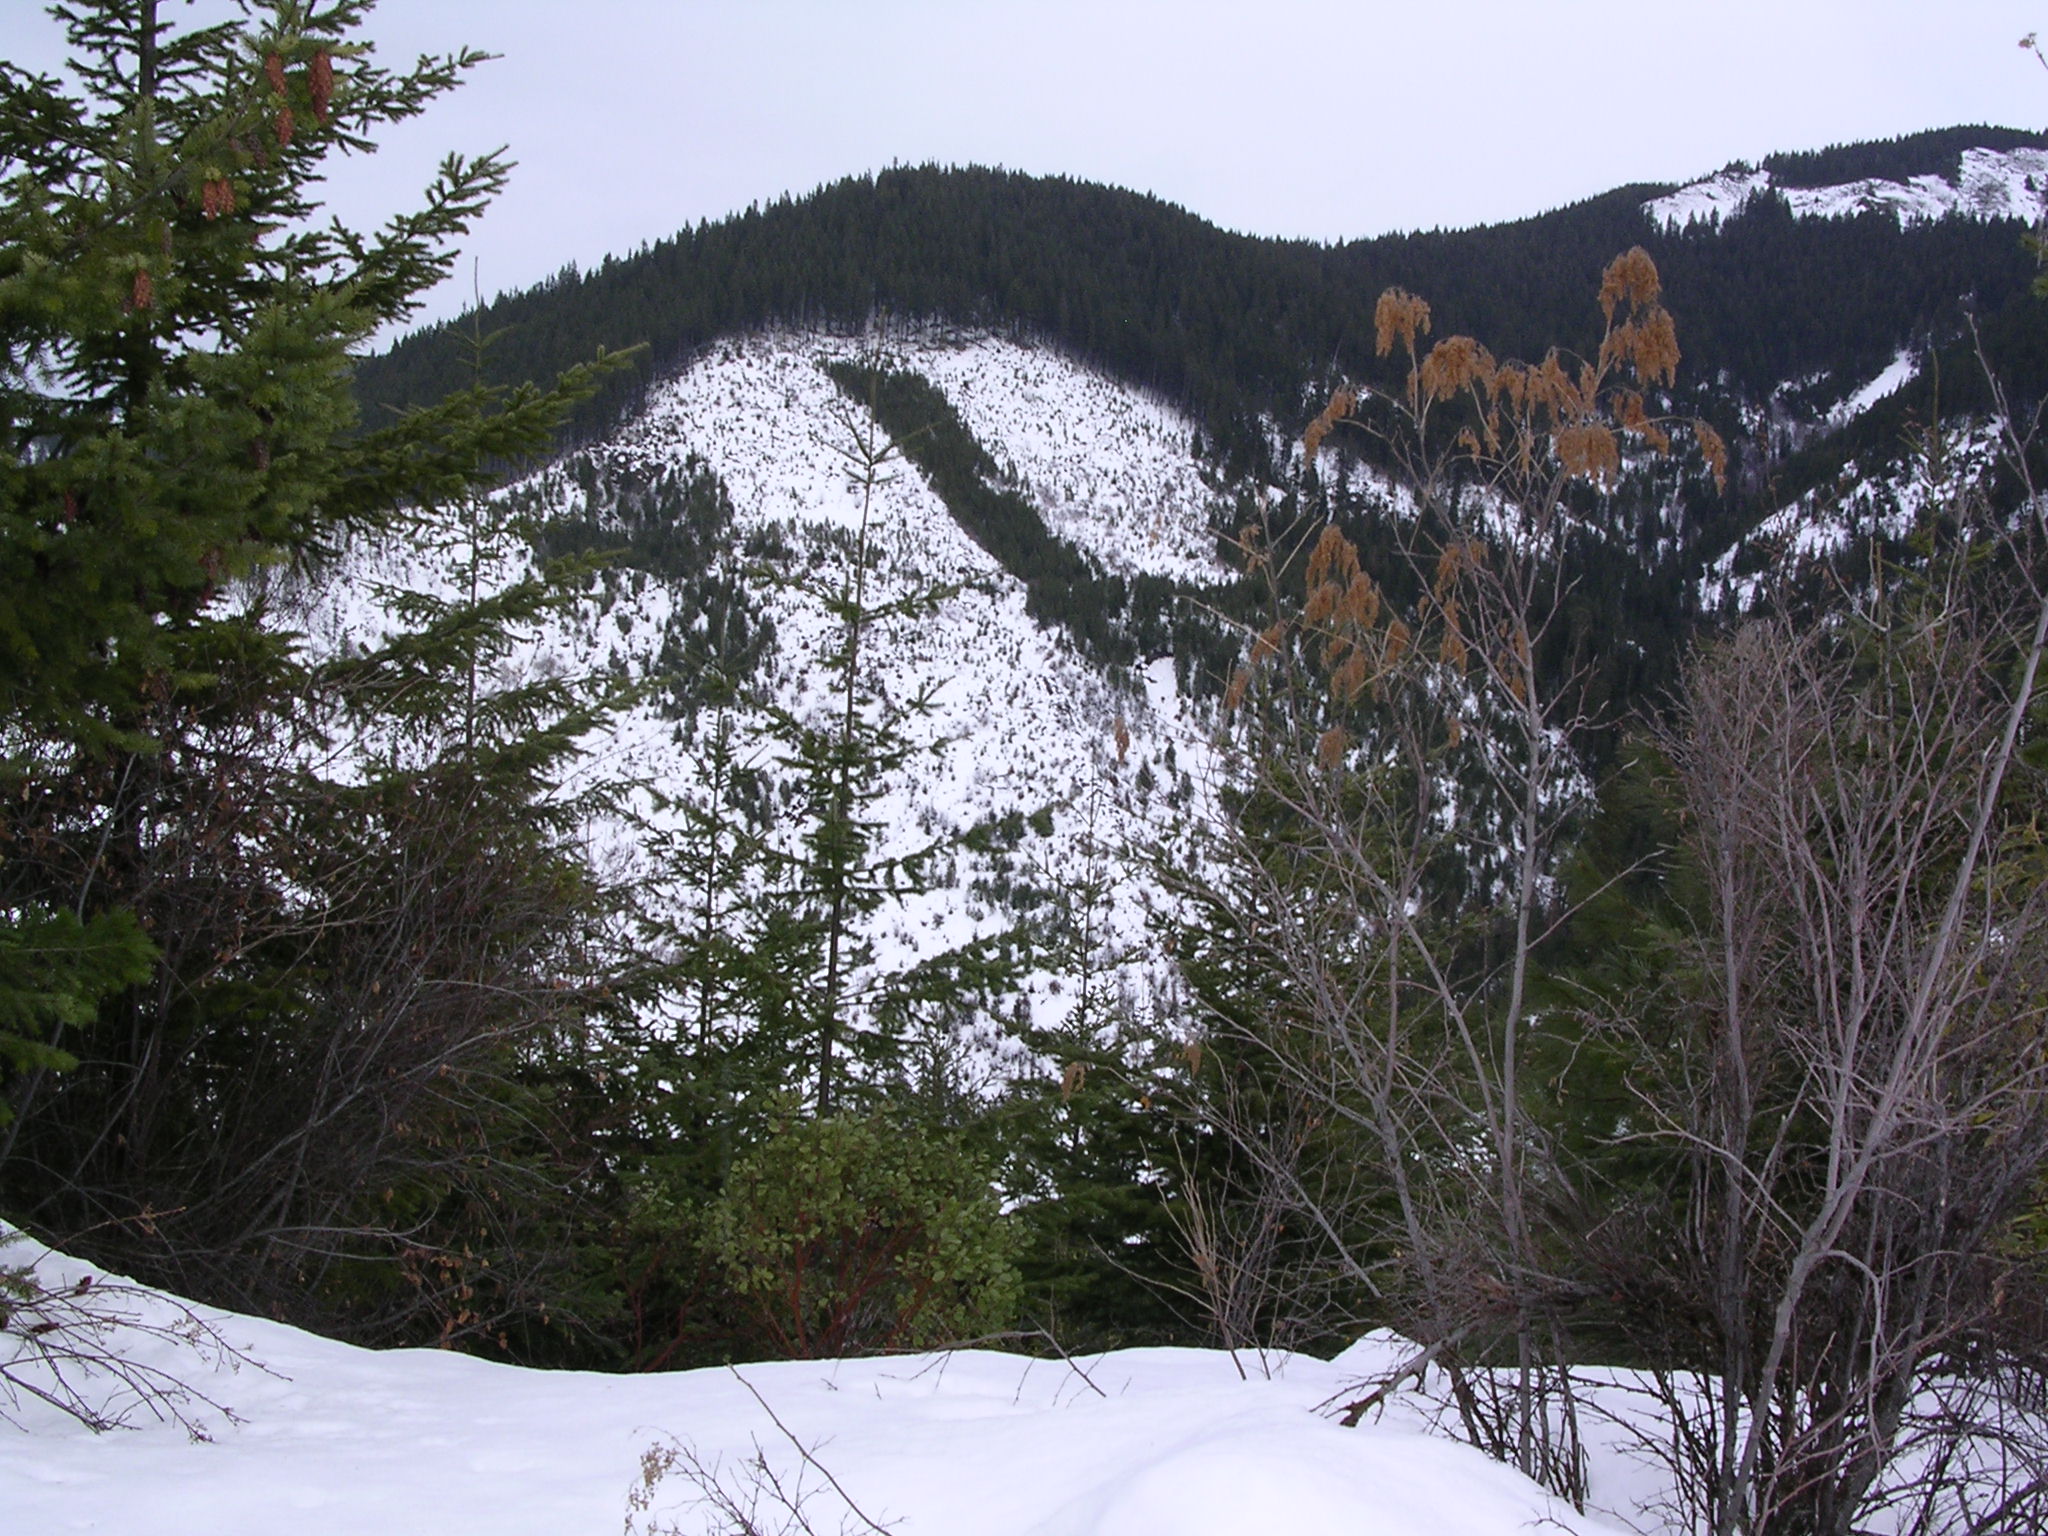 This is a view of a snowy mountain framed by some coniferous trees. This picture was taken in the Polallie Cooper Timber Sale which occured in 2005.